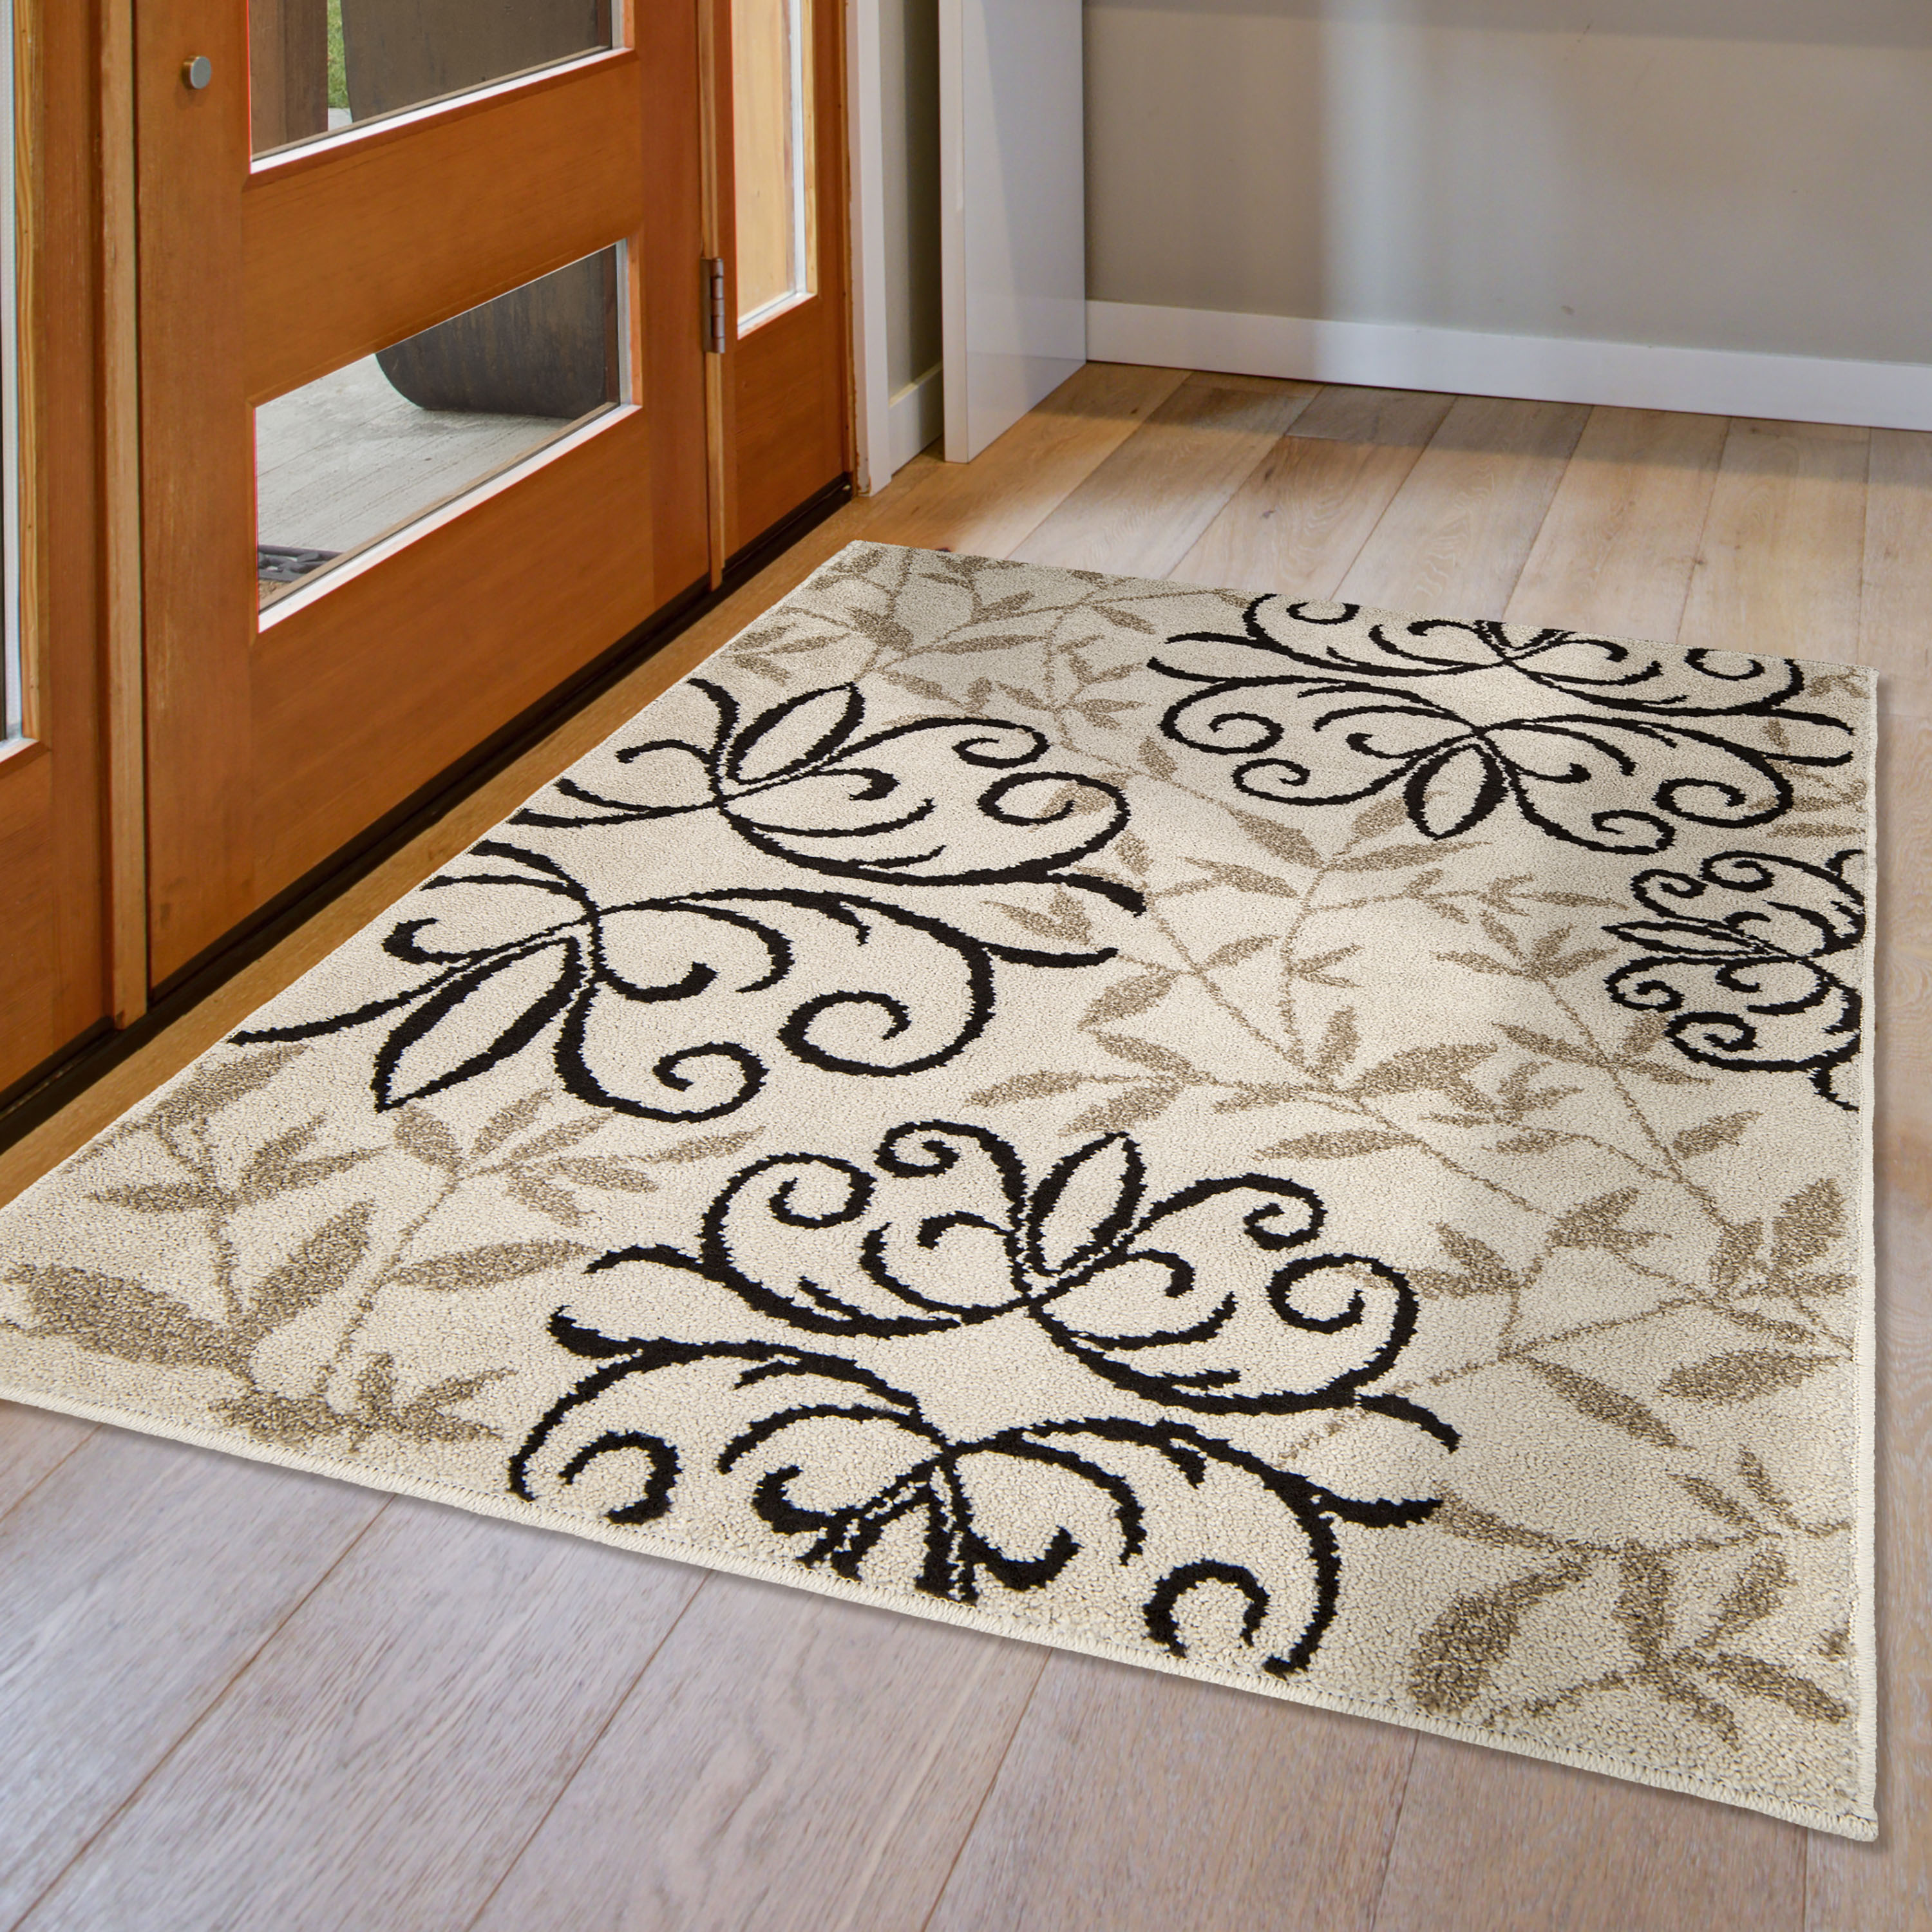 Better Homes & Gardens Iron Fleur Area Rug, Off-White, 2'6" x 3'8" - image 1 of 8